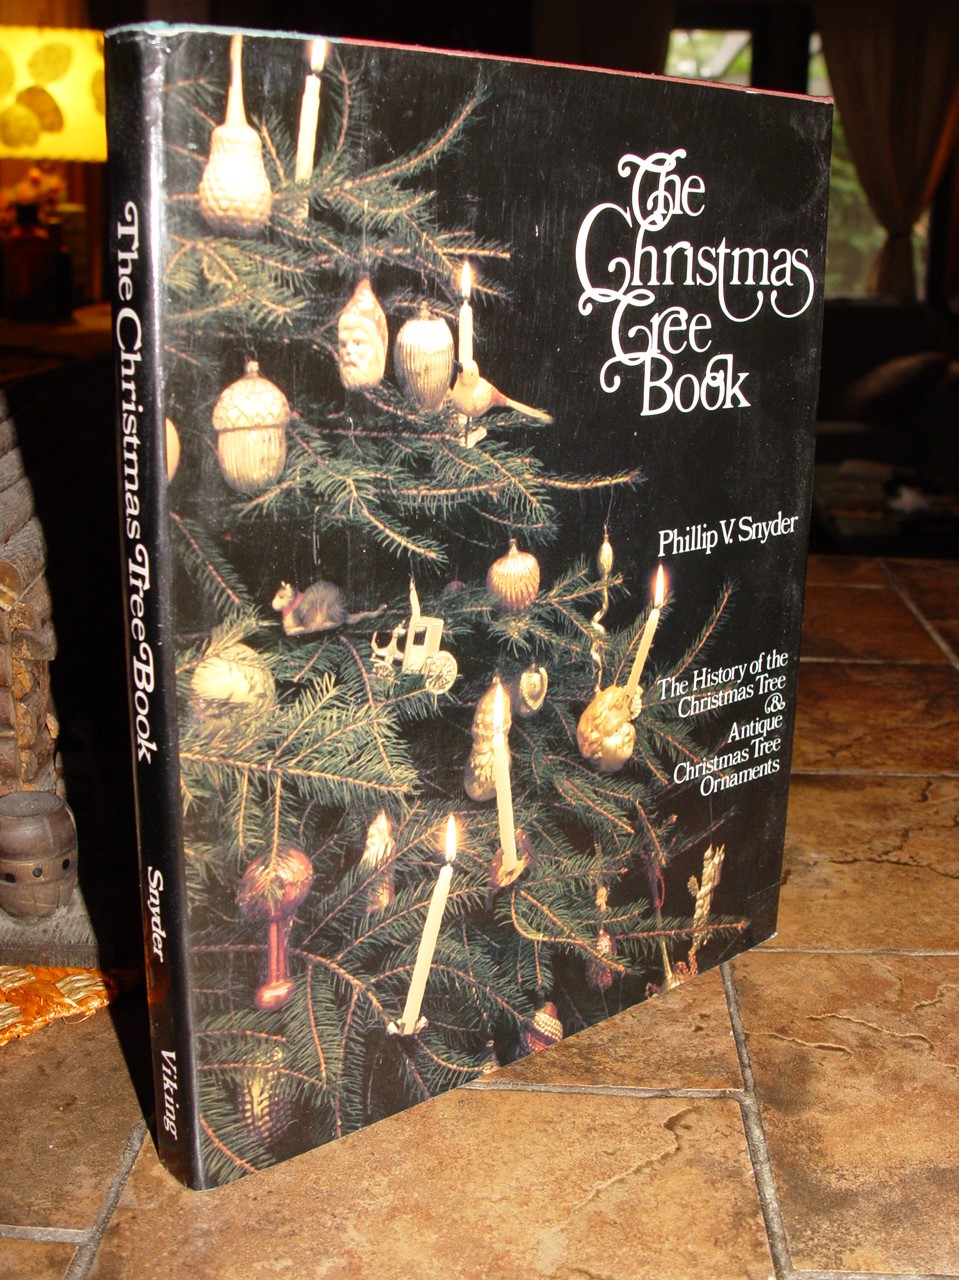 The Christmas Tree Book 1976: Antique
                        Christmas Ornaments; Phillip V. Snyder